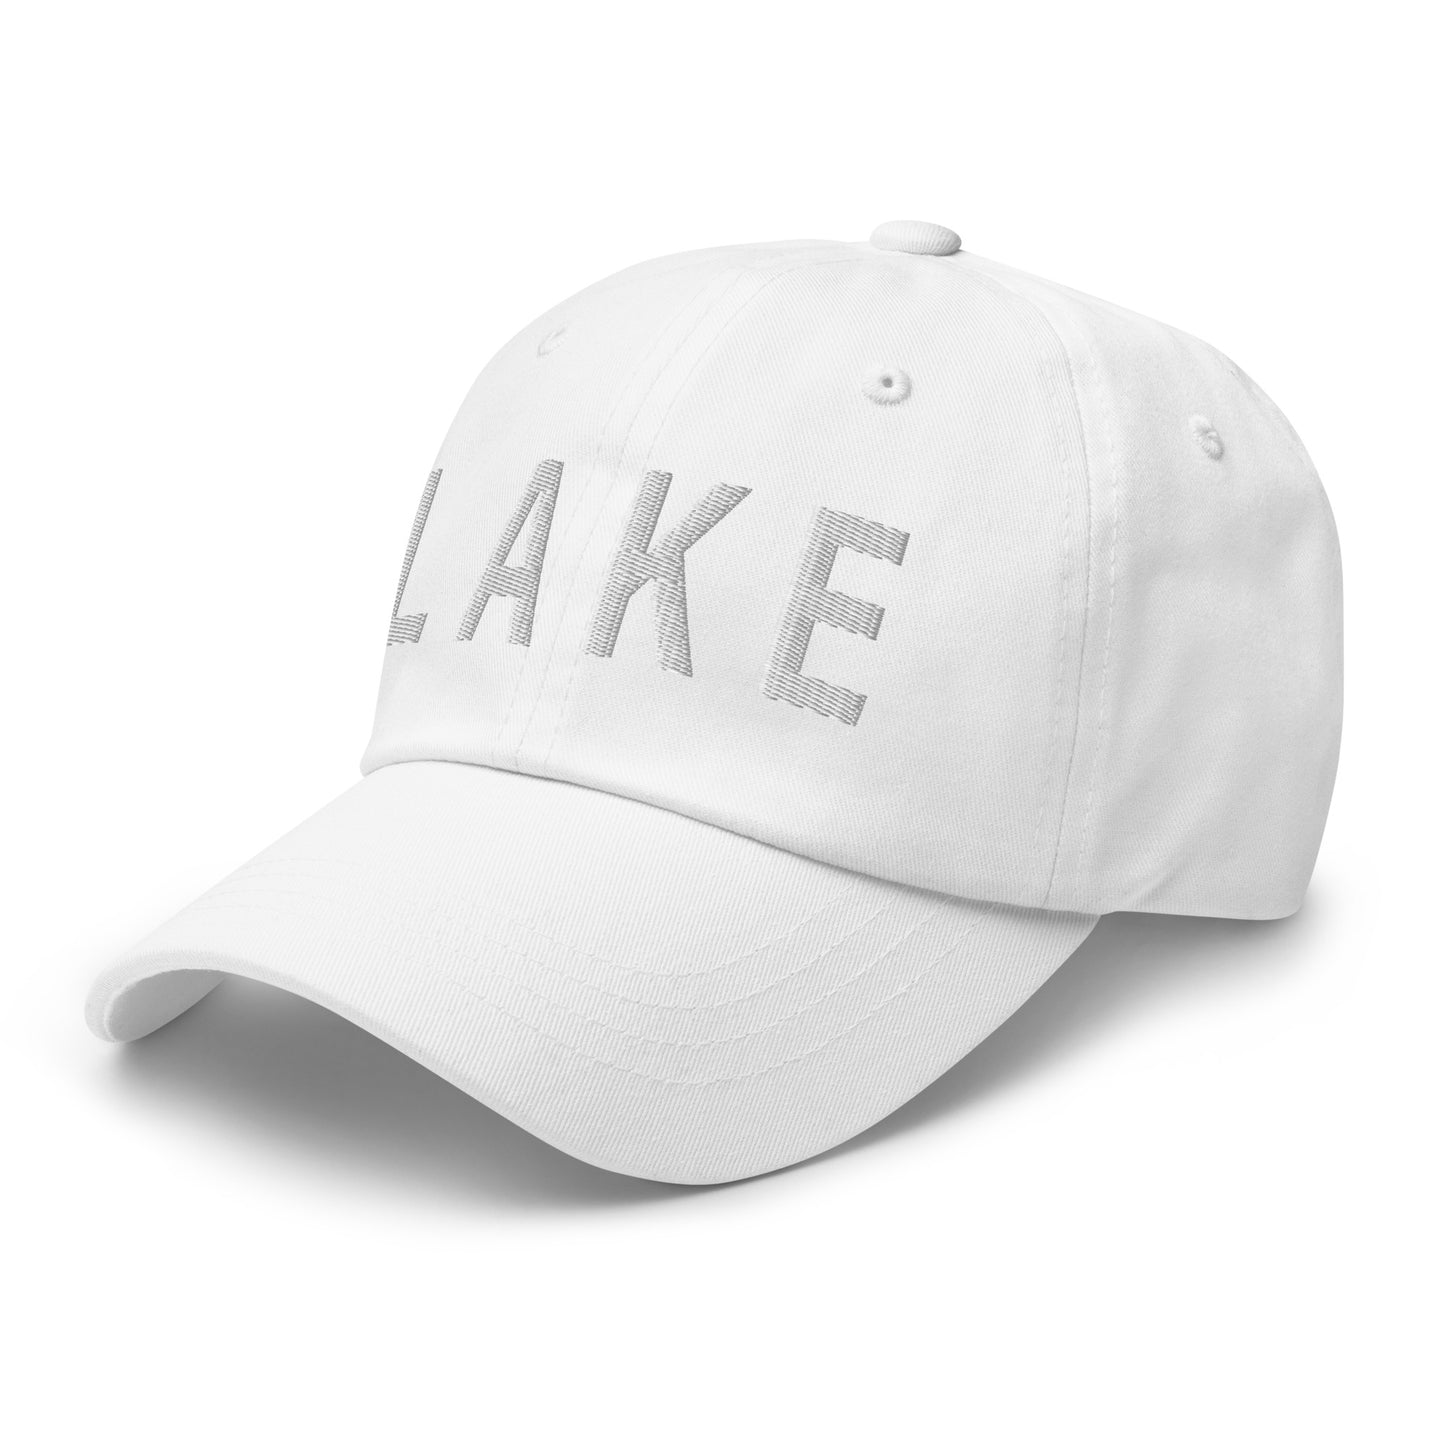 Lake Embroidered Dad Hat